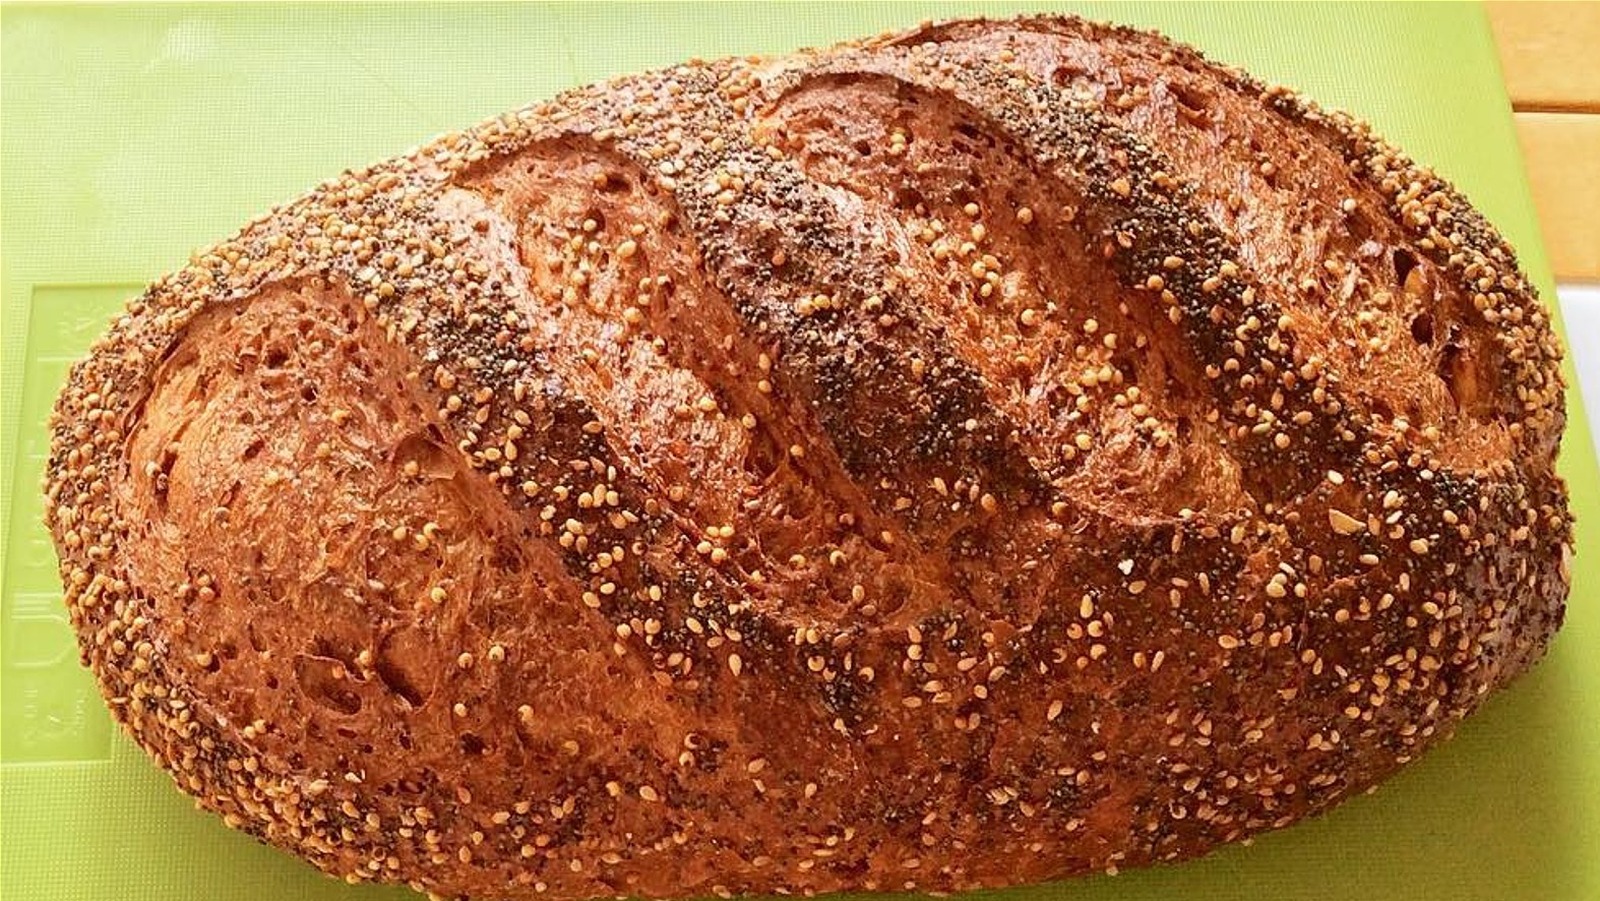 The Grocery Store Bread With A Seedy Reputation